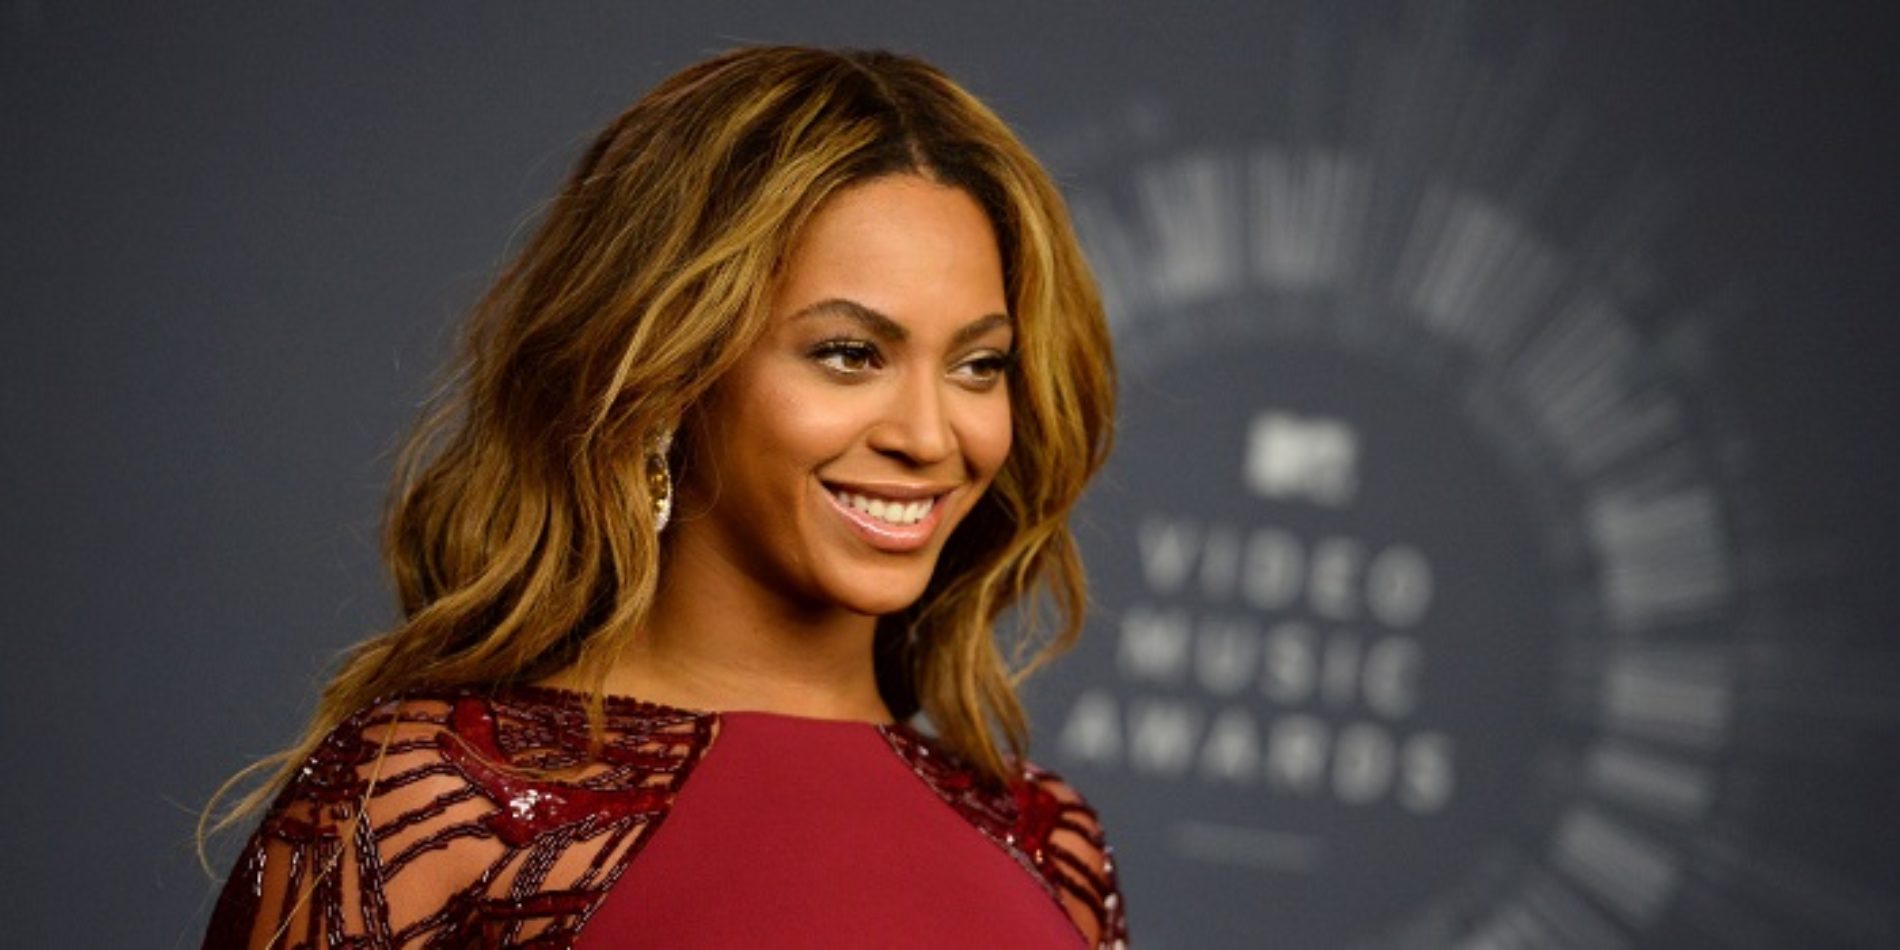 Is Beyoncé Returning To The Big Screen For Bradley Cooper’s “A Star Is Born” Remake?